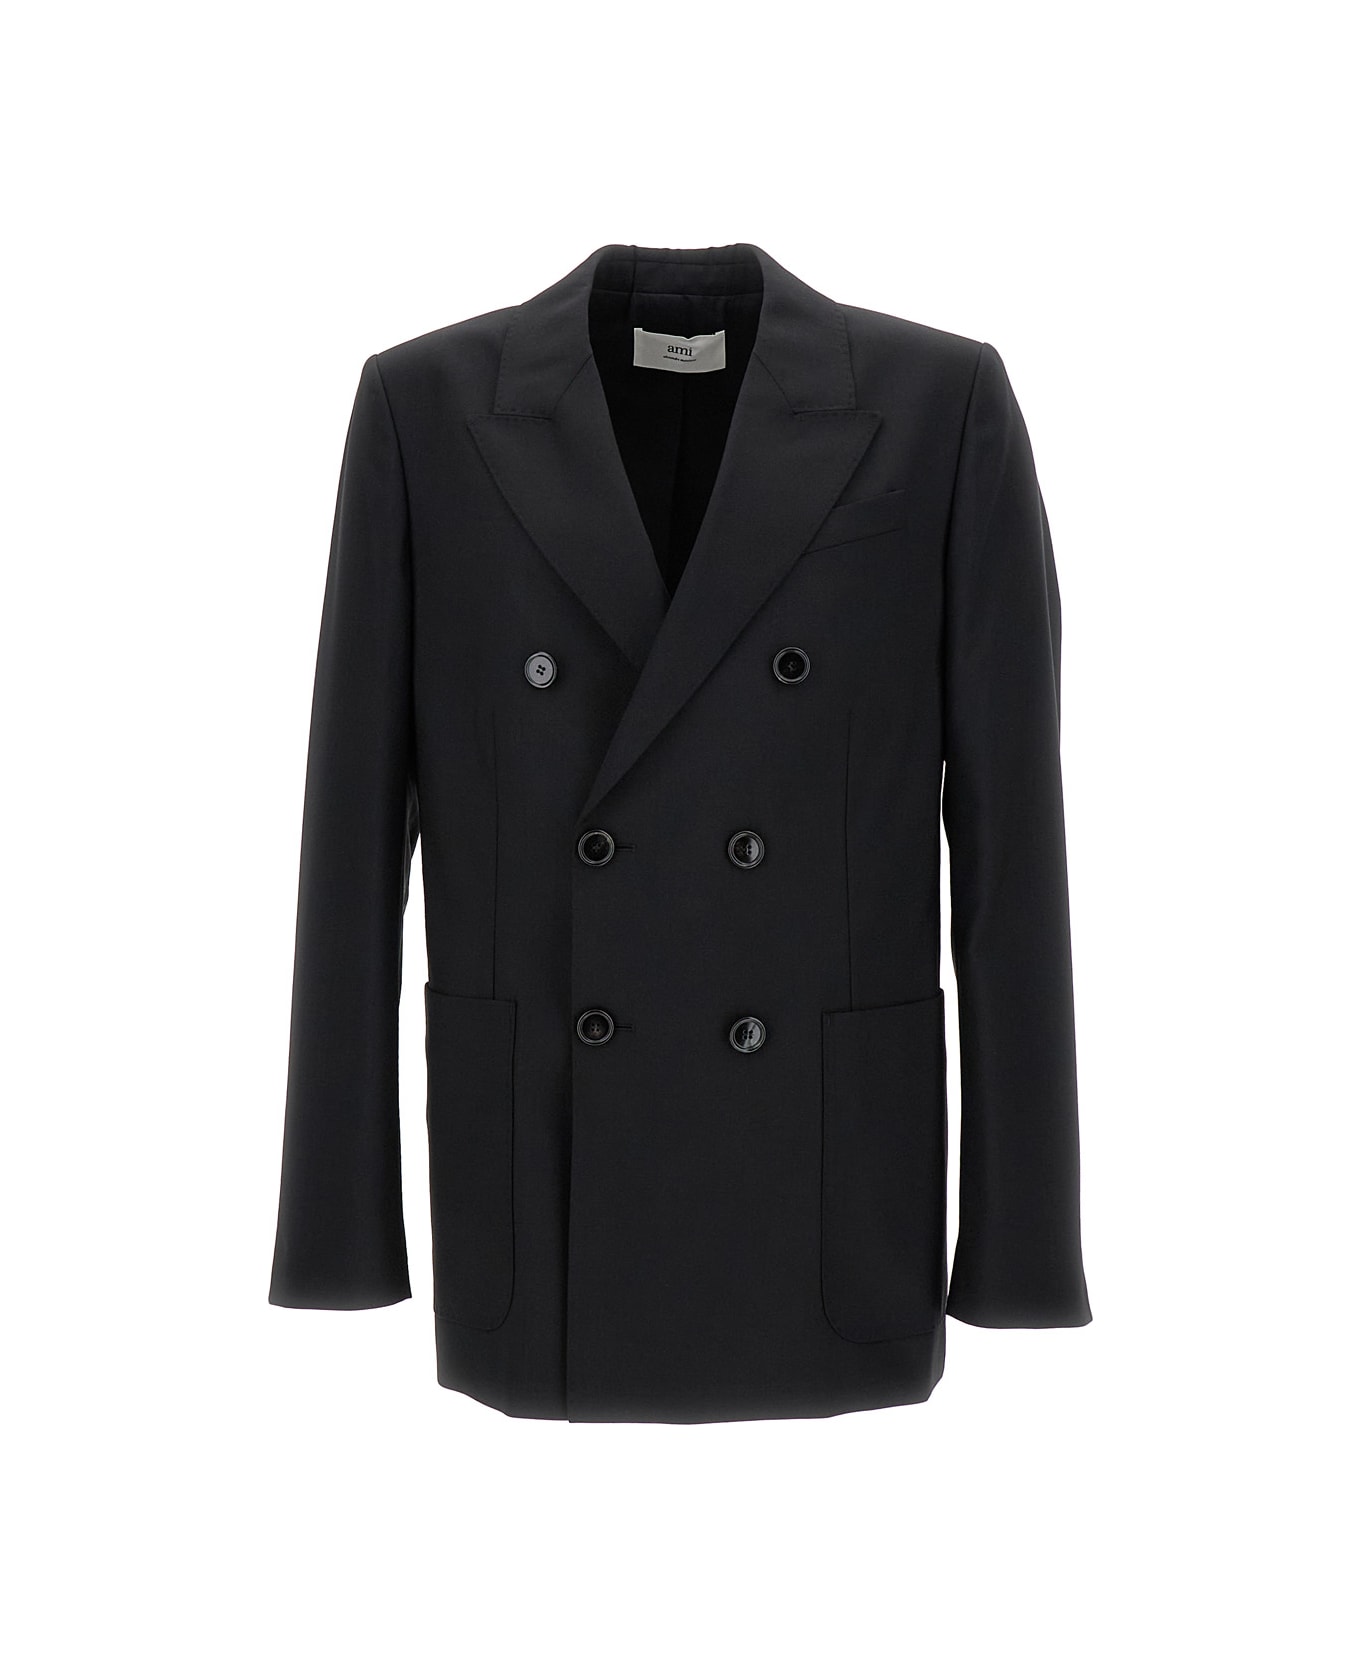 Ami Alexandre Mattiussi Black Double Breasted Blazer With Buttons In Wool Man - BLACK